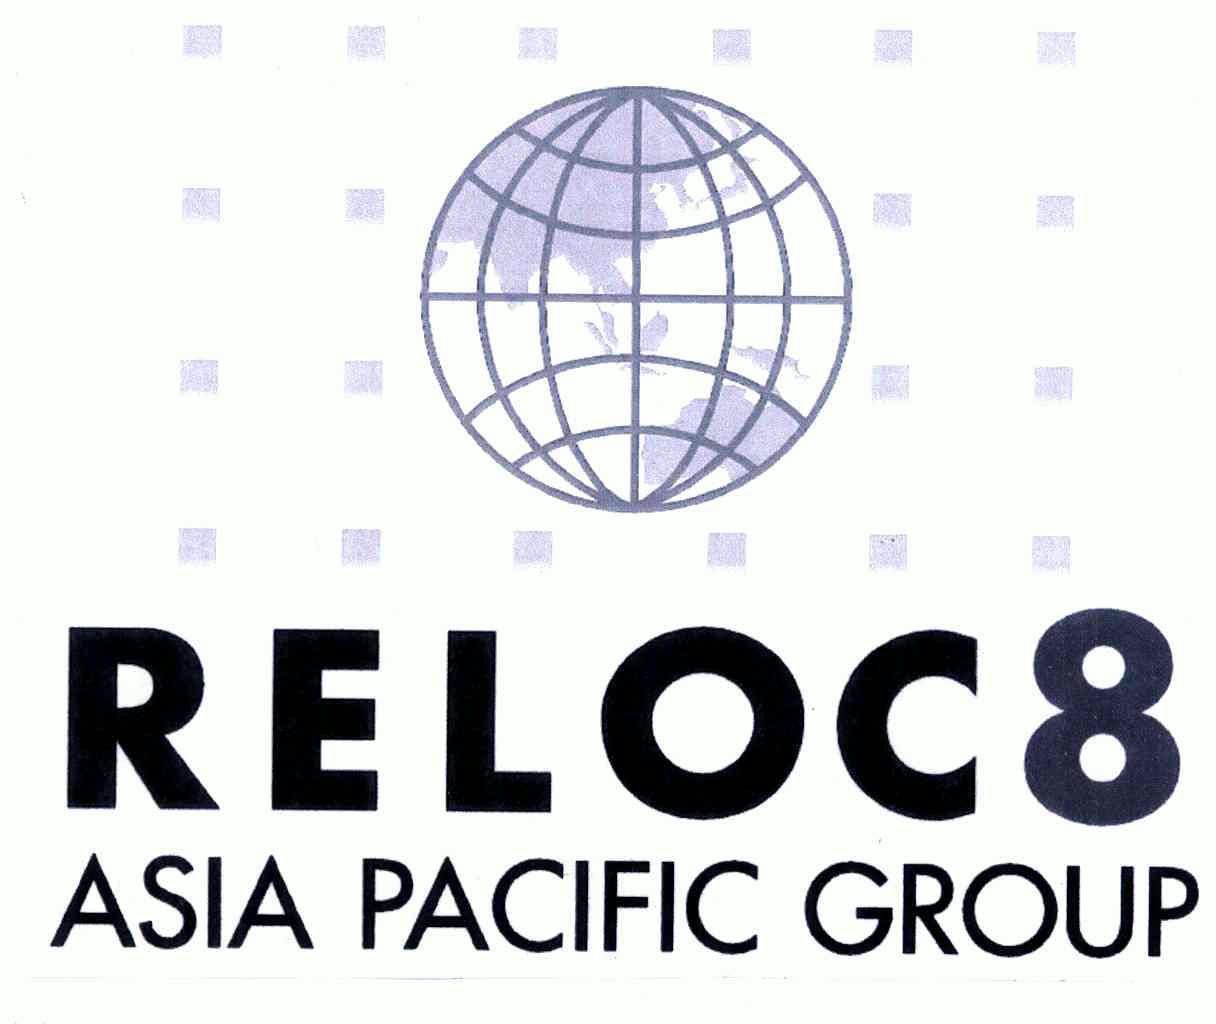 reloc8asiapacificgroup 6480027 第35类-广告销售 2007-12-28 详情